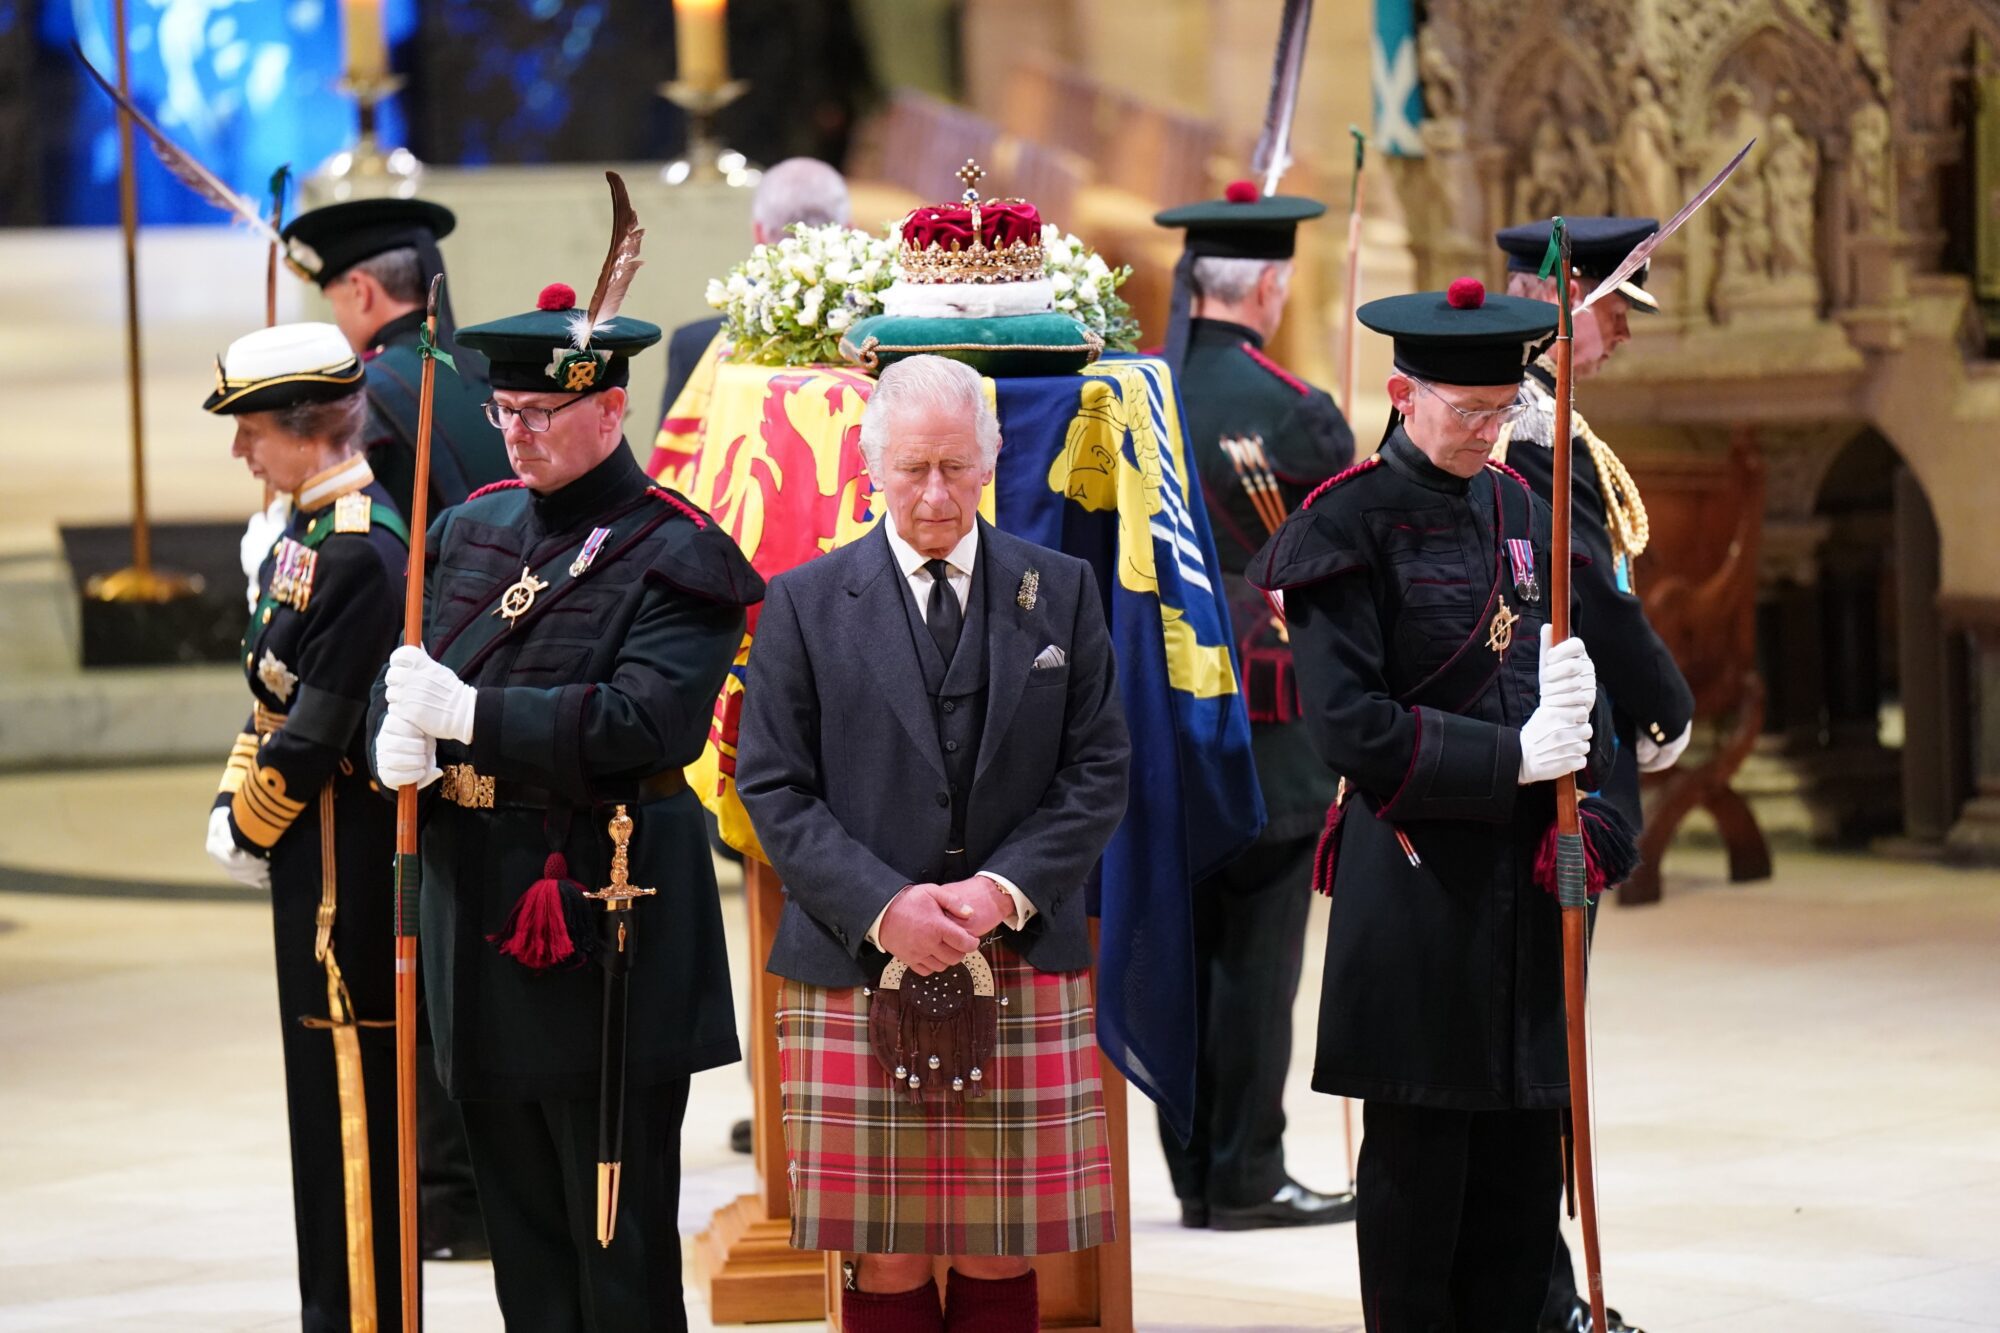 The Queen’s children hold a Vigil beside Her Majesty’s coffin in St Giles’ Cathedral, Edinburgh.
